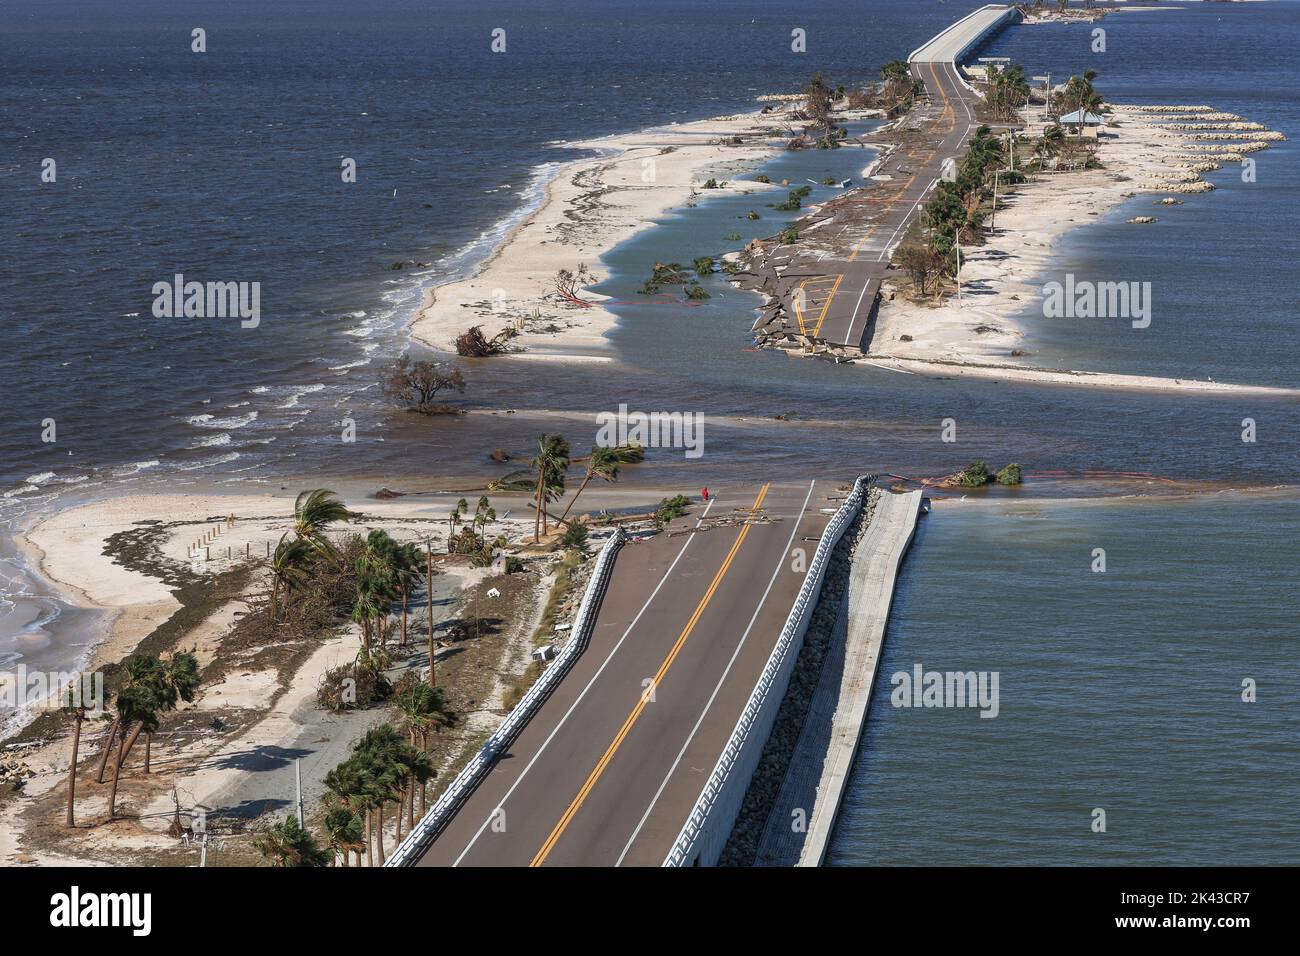 An aerial view of a partially collapsed Sanibel Causeway after Hurricane Ian caused widespread destruction, in Sanibel Island, Florida, U.S., September 29, 2022. REUTERS/Shannon Stapleton Stock Photo